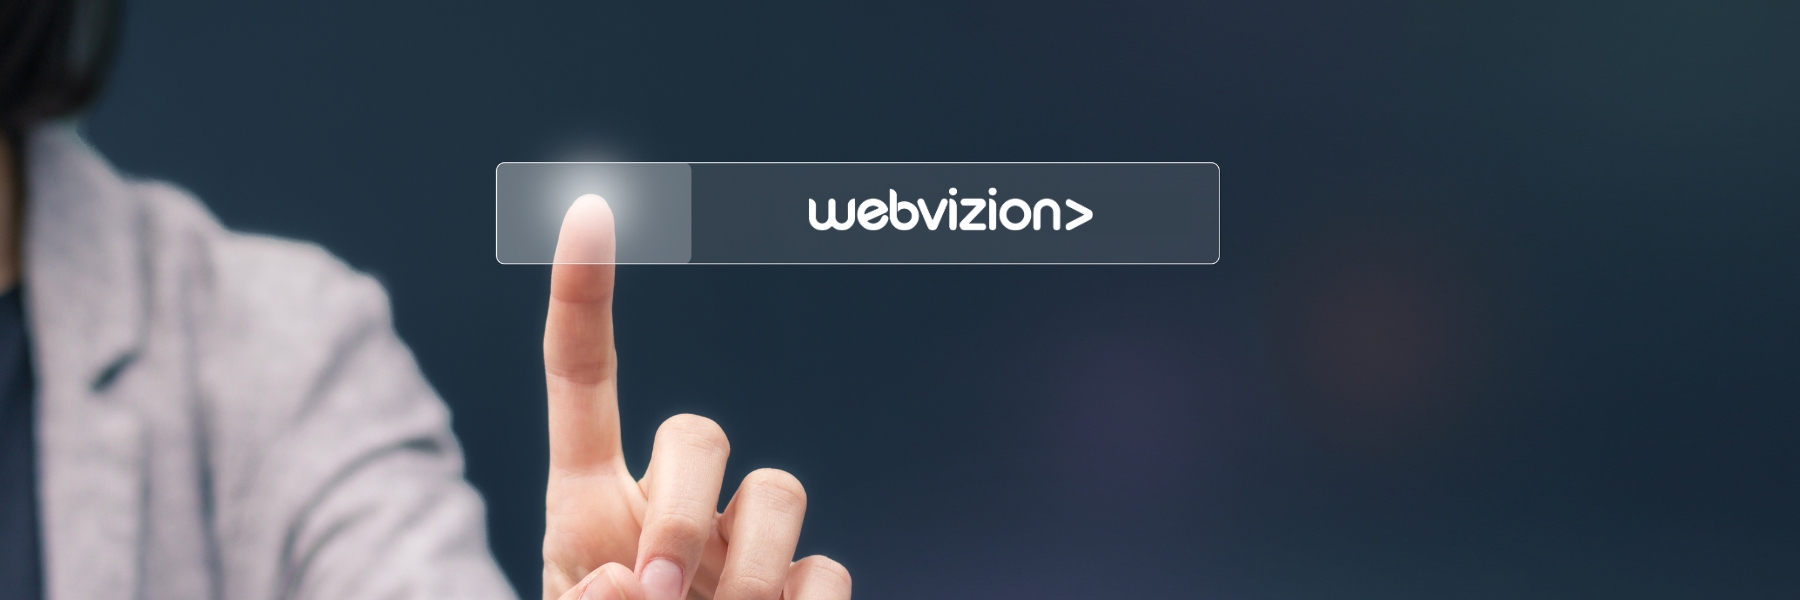 Why-Choose-Webvizion-Choosing-the-Right-Branding-and-Website-Design-Agency-in-Dubai